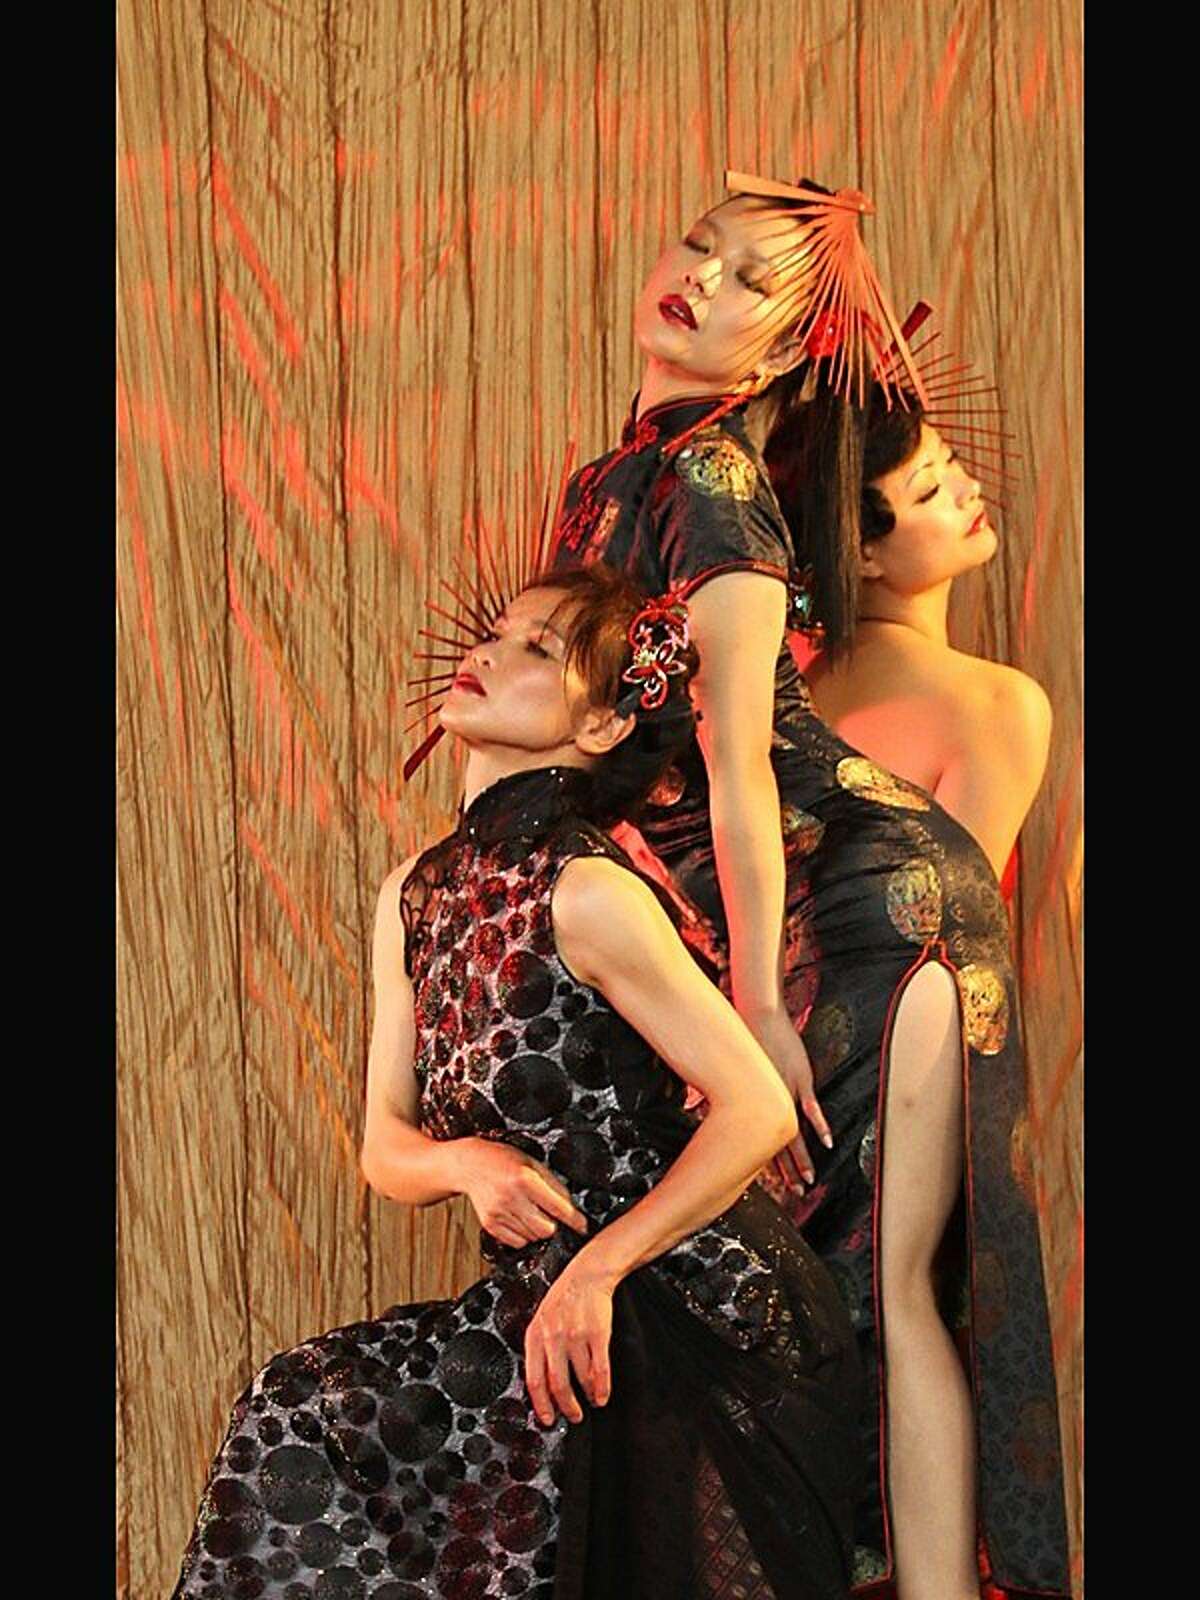 Lily Cai Dance Company premieres ?’Shanghai Women?“ this weekend. Dancers from left to right: Phong, Ling, and C. Photo by Fu Li